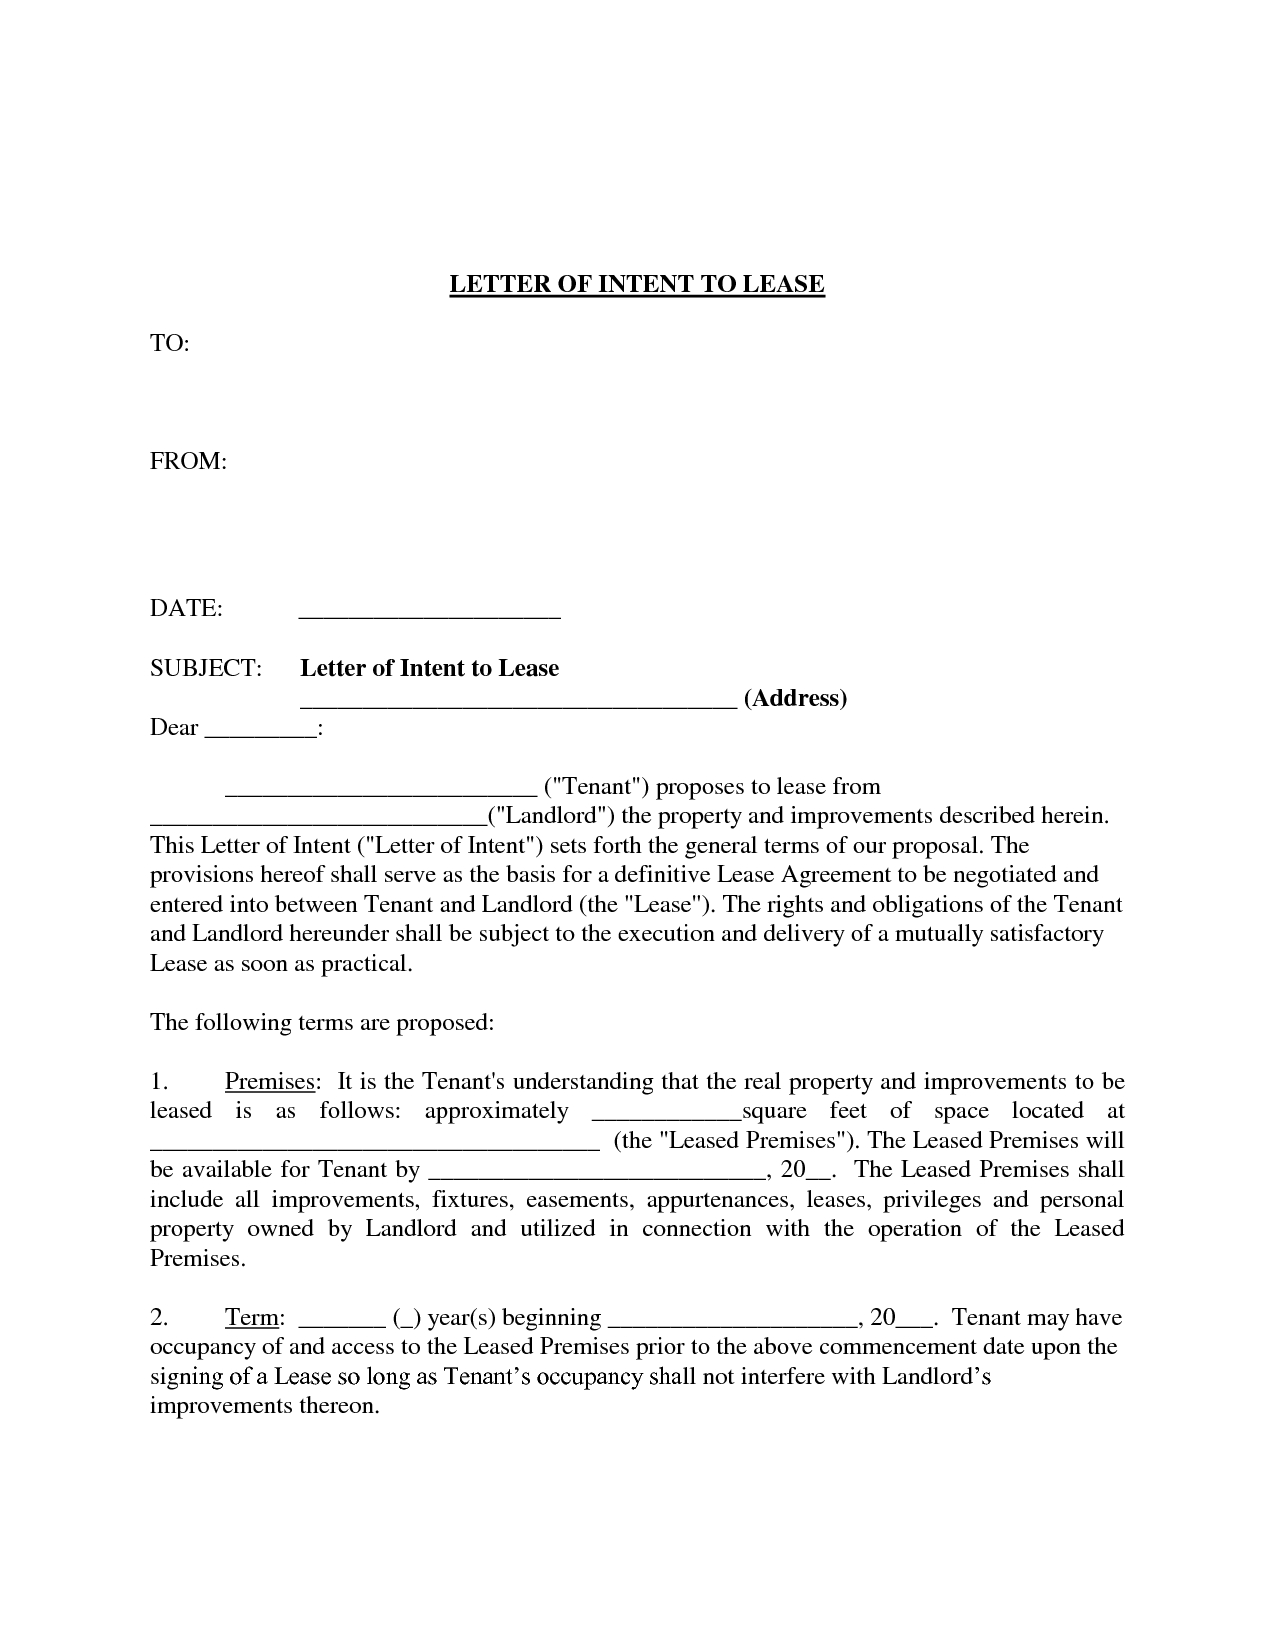 Commercial Lease Letter Of Intent Template - Templatemercial Real Estate Letter Intent to Lease for Space